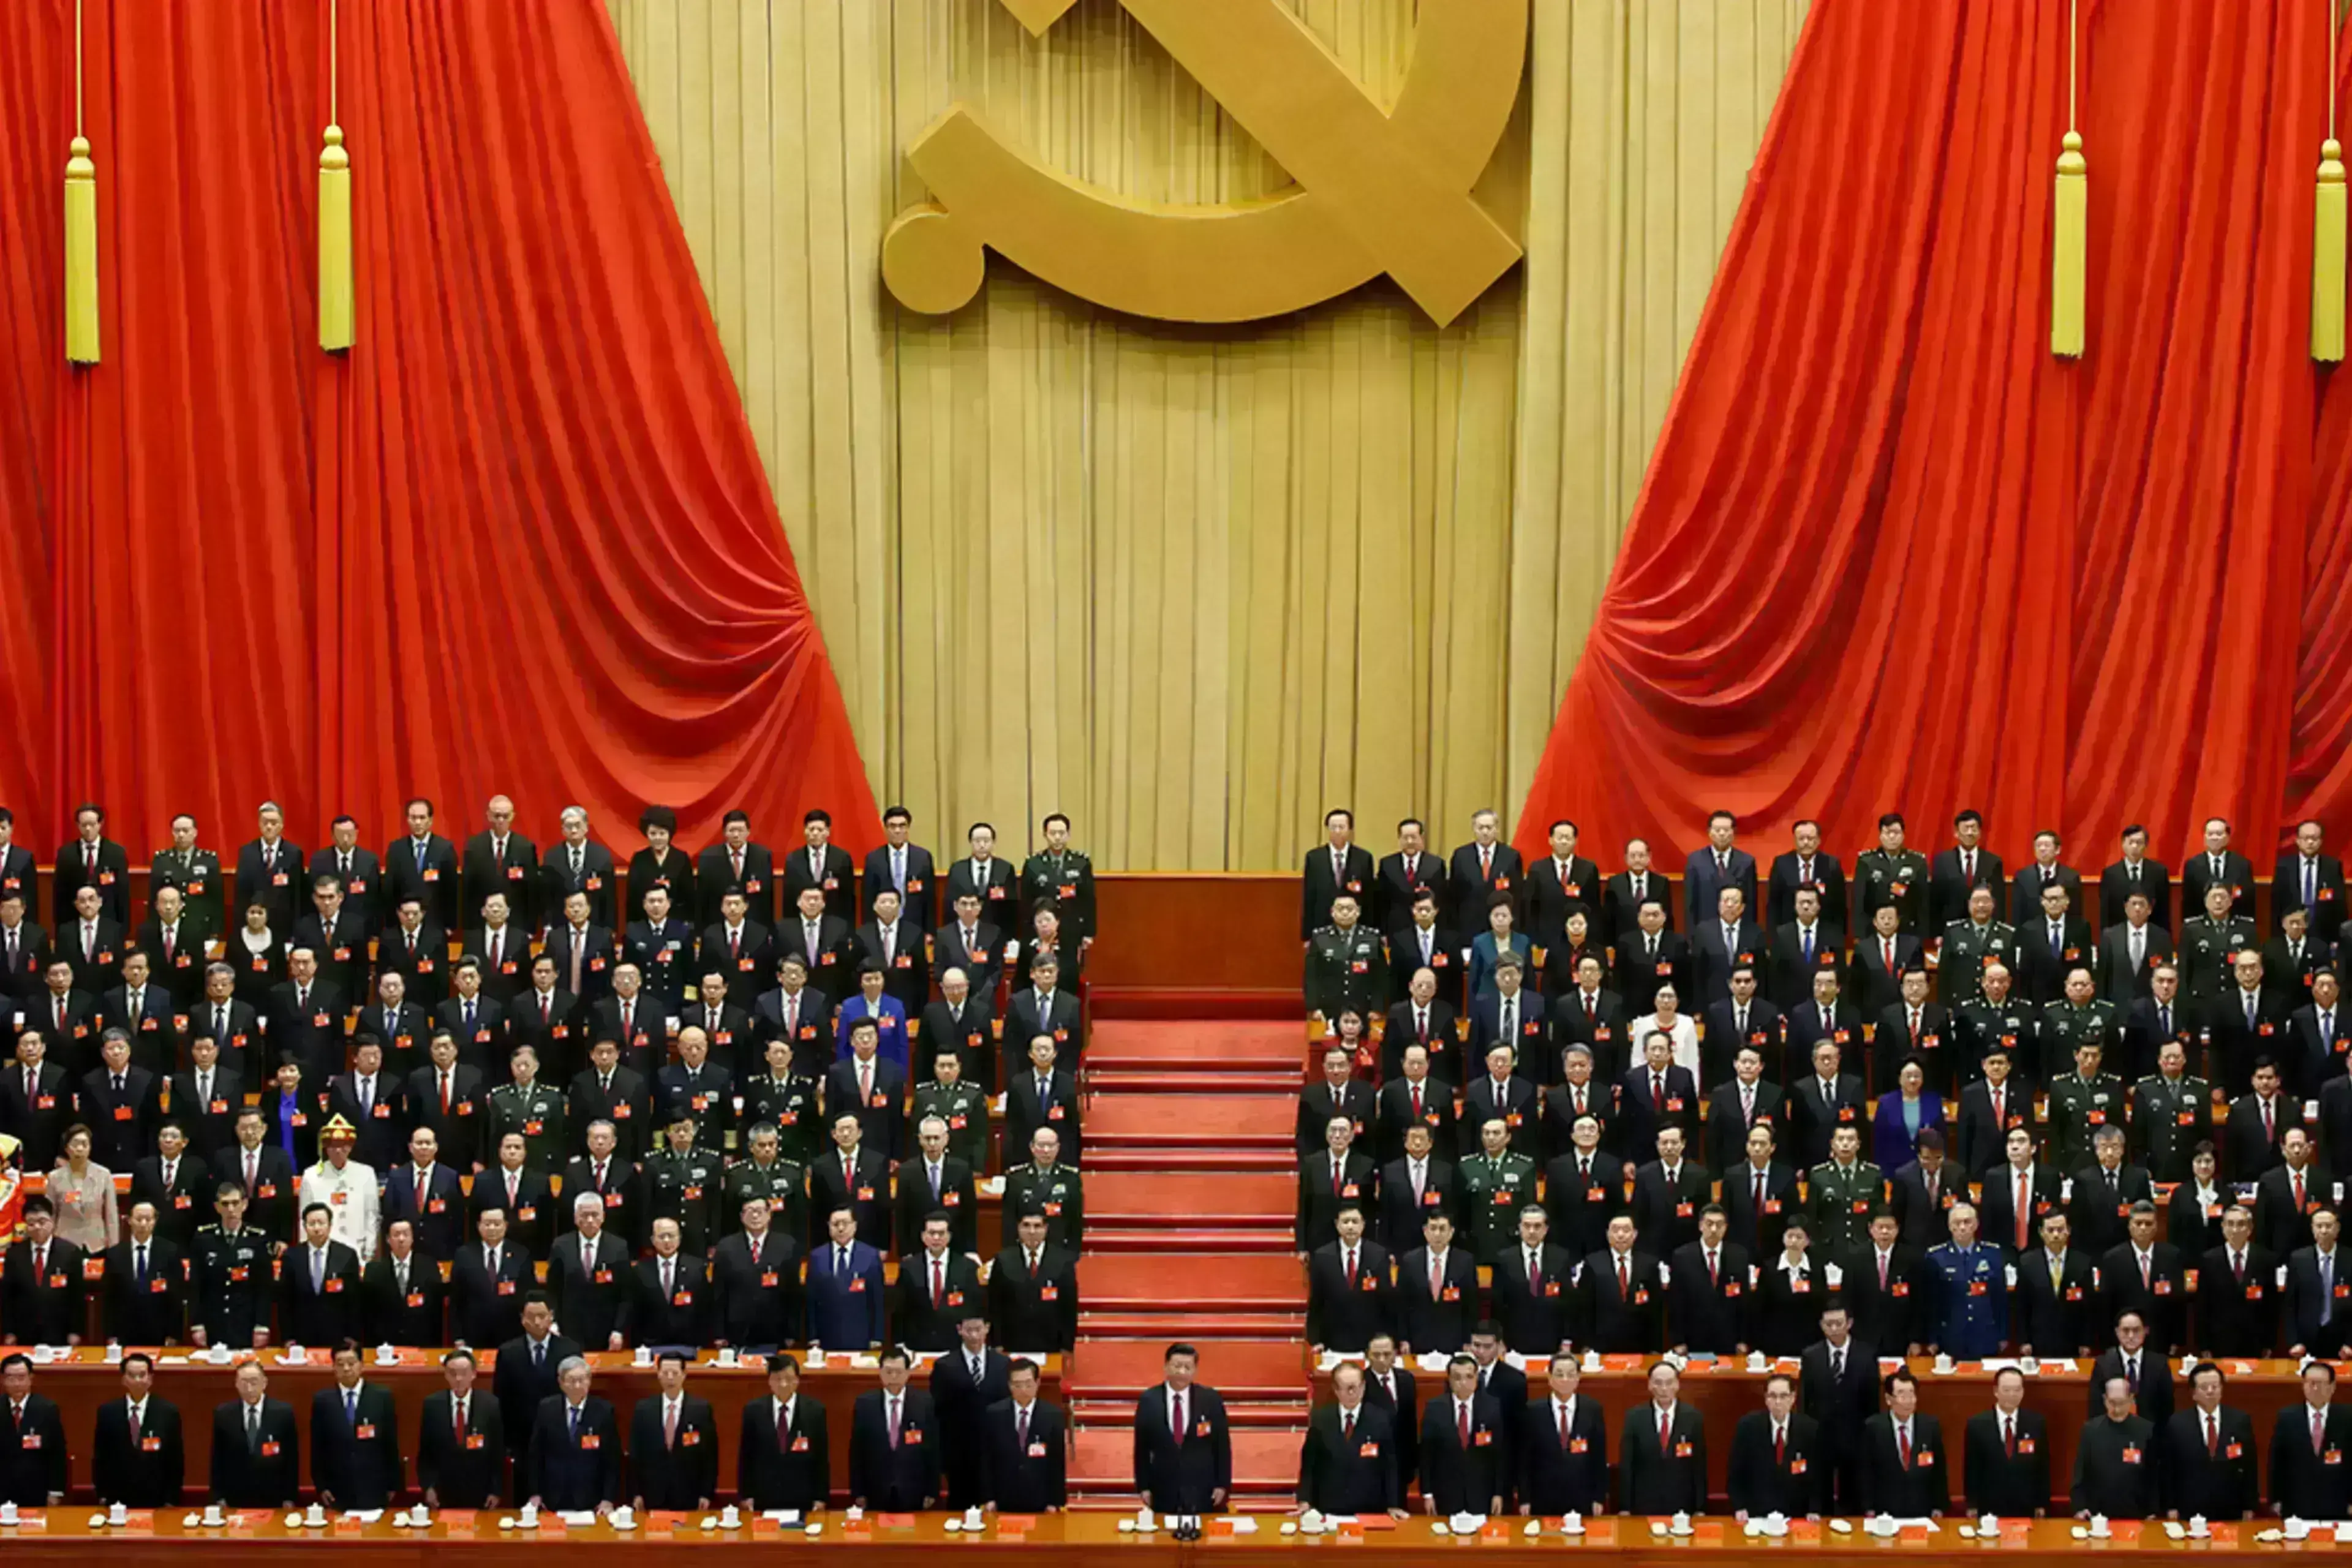 The Chinese Communist Party | Council on Foreign Relations